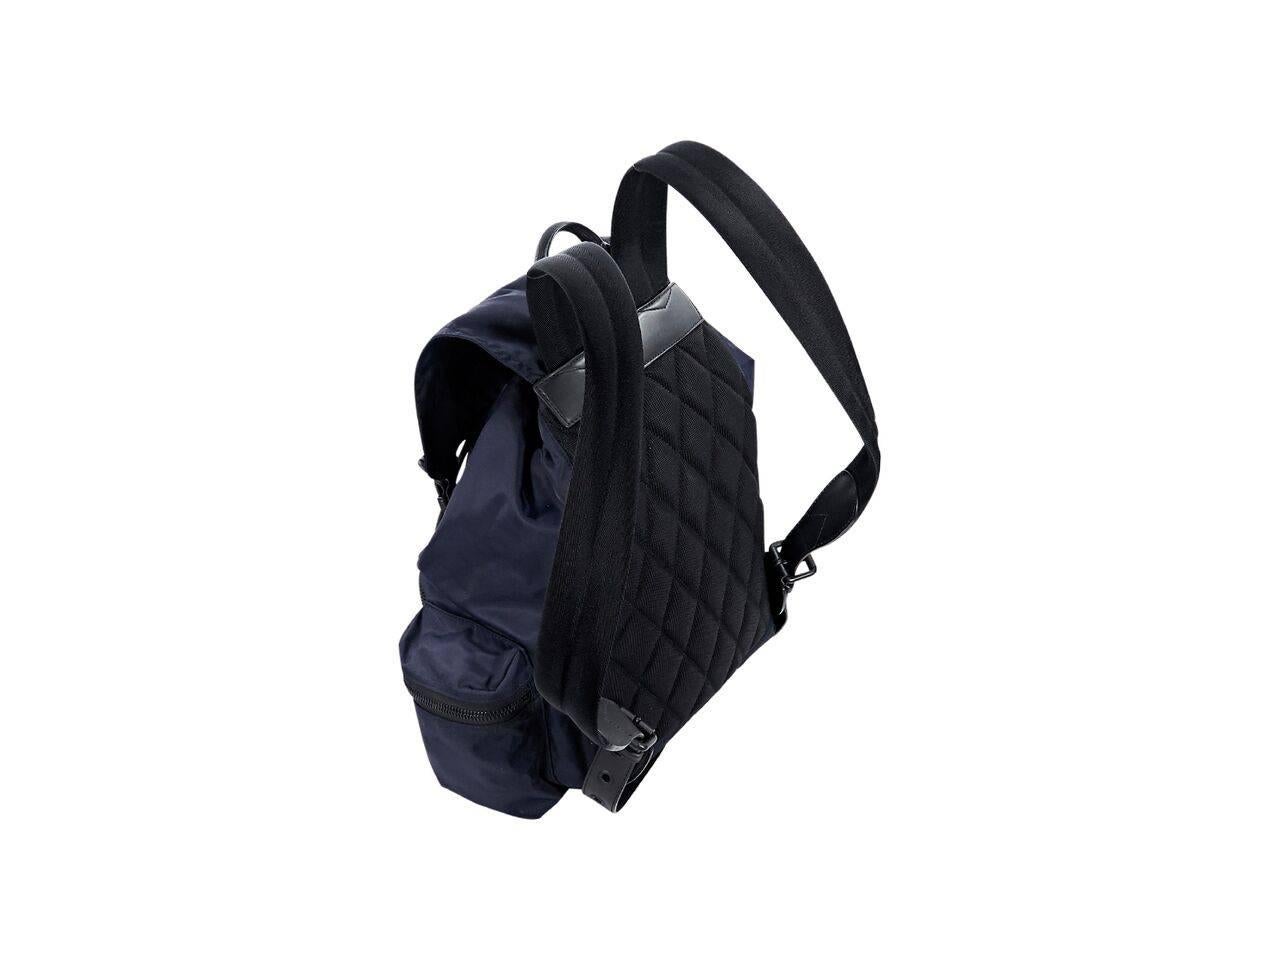 Product details:  Navy blue nylon backpack by Burberry.  Trimmed with black saffiano leather.  Top carry handle.  Adjustable shoulder straps.  Drawstring closure under front flap.  Concealed magnetic snap closures.  Lined interior with inner zip and